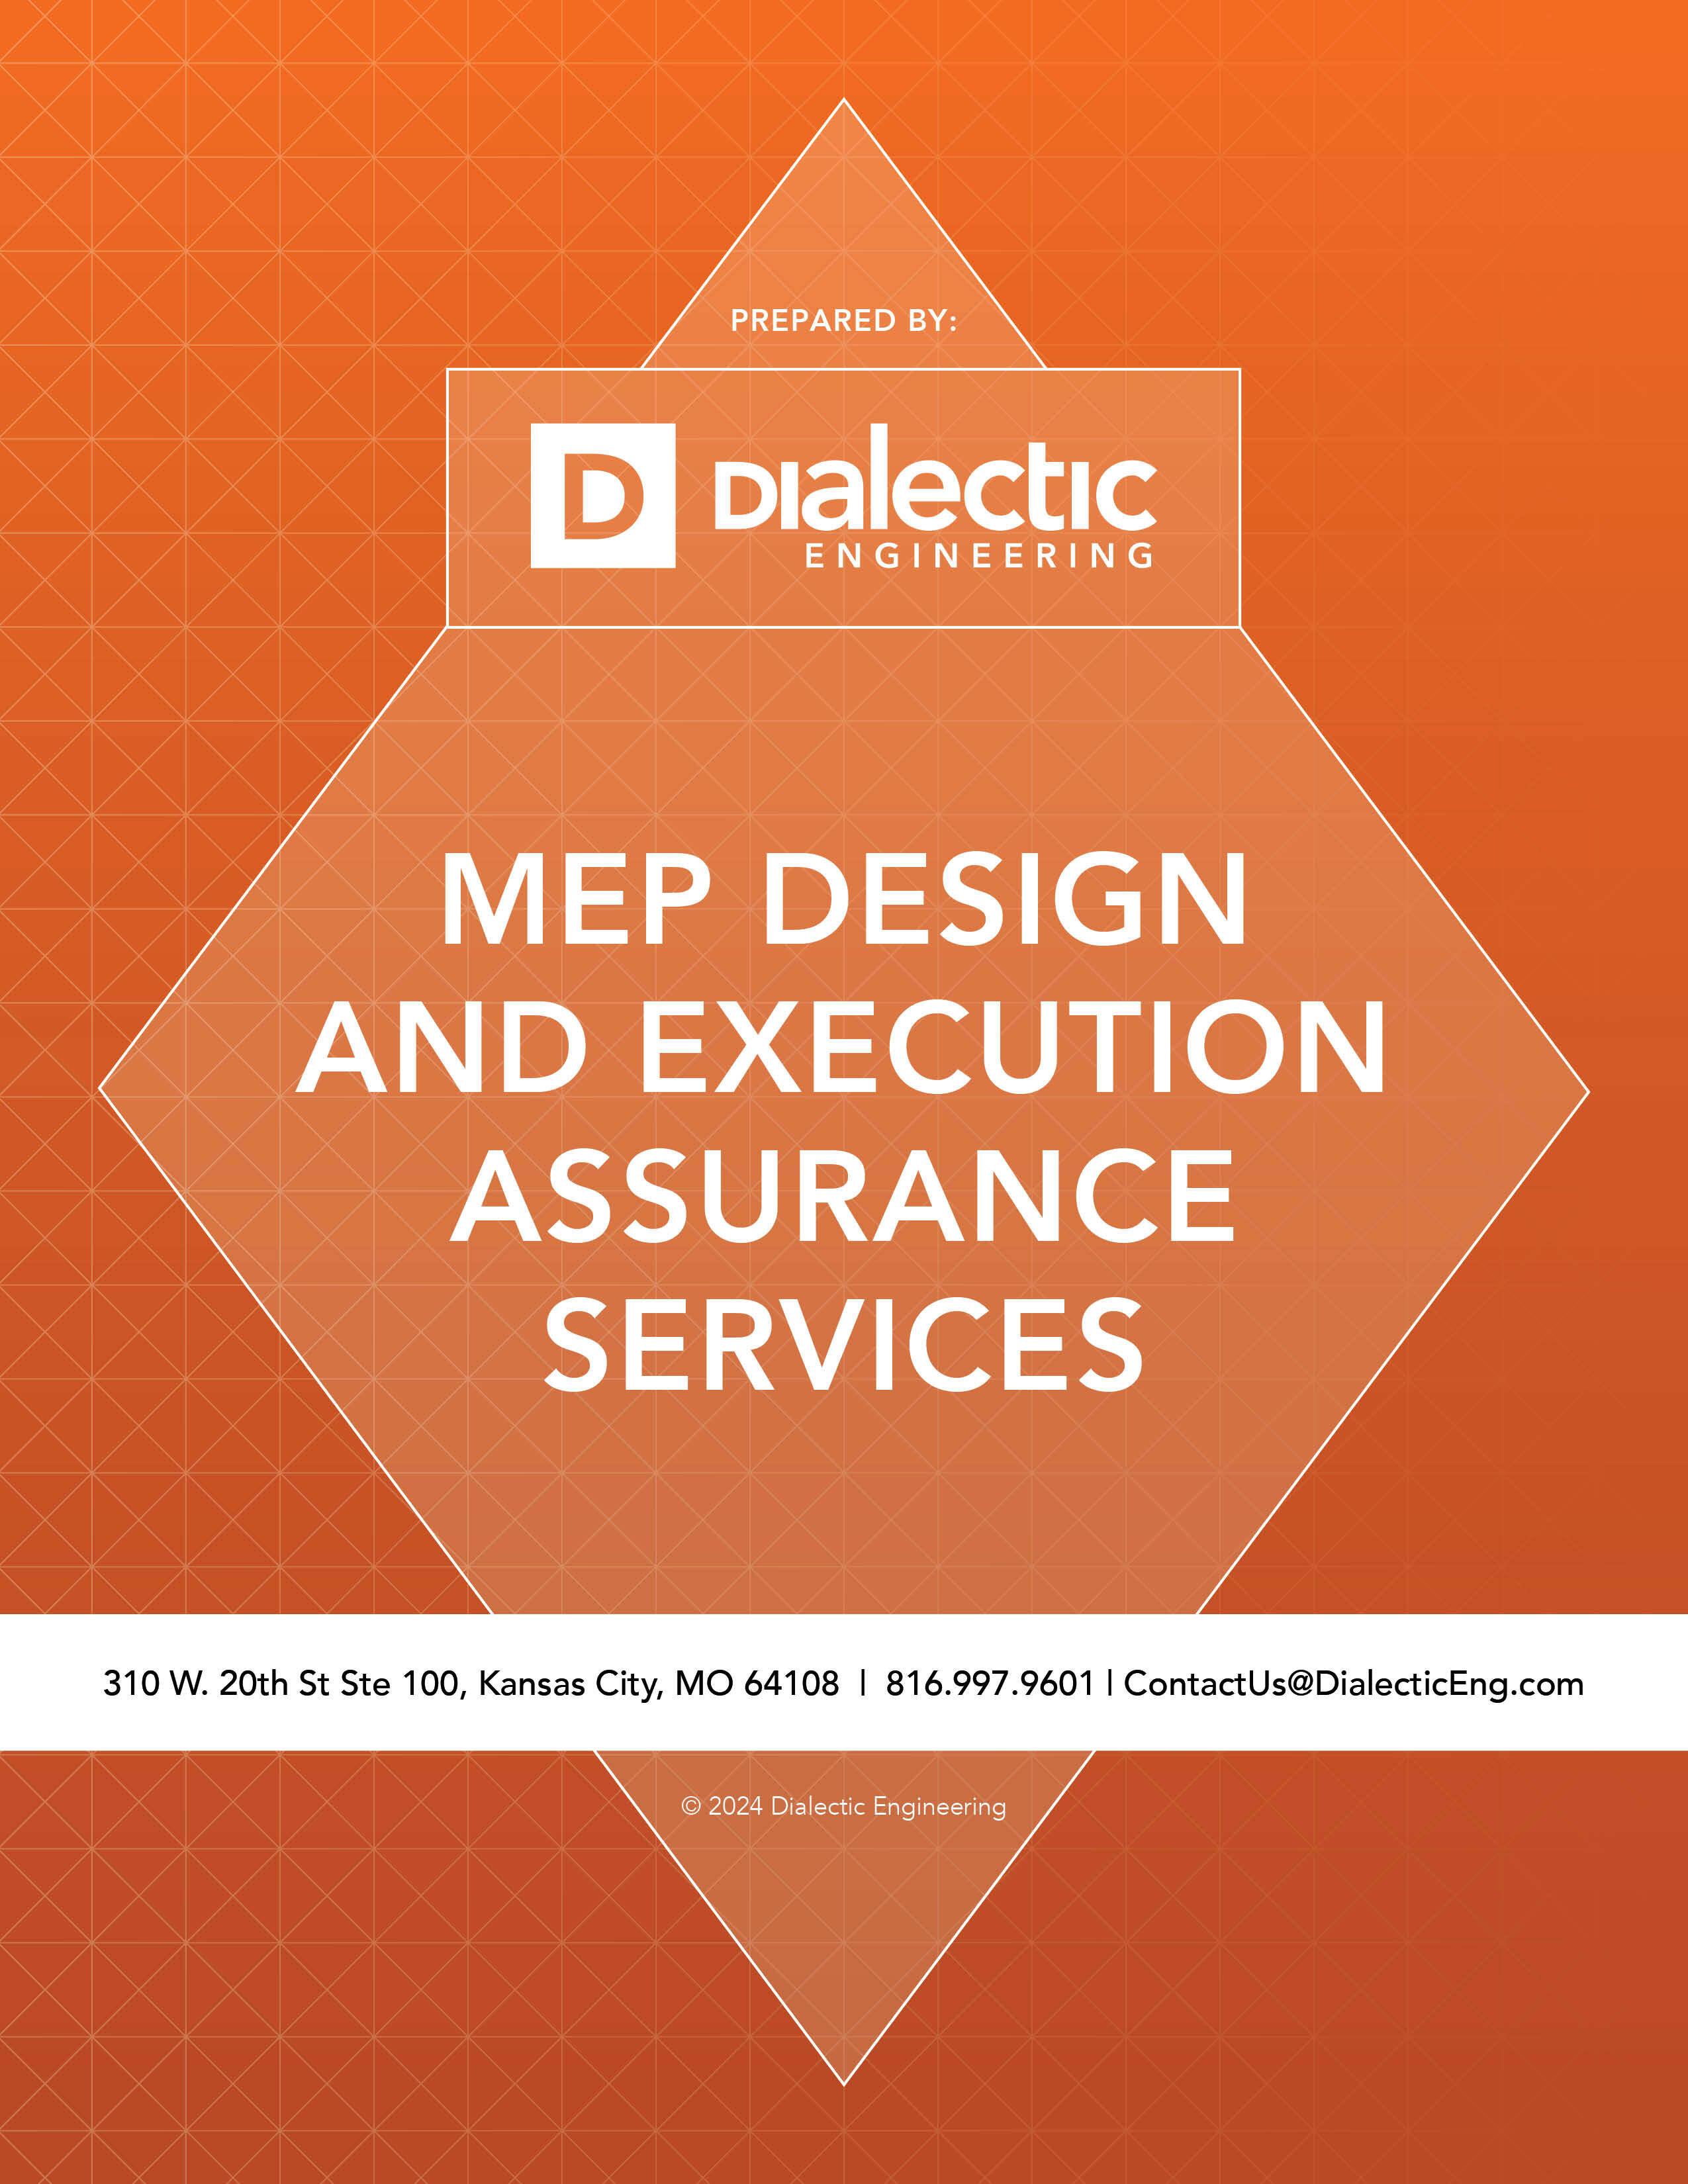 MEP Design and Execution Assurance Services